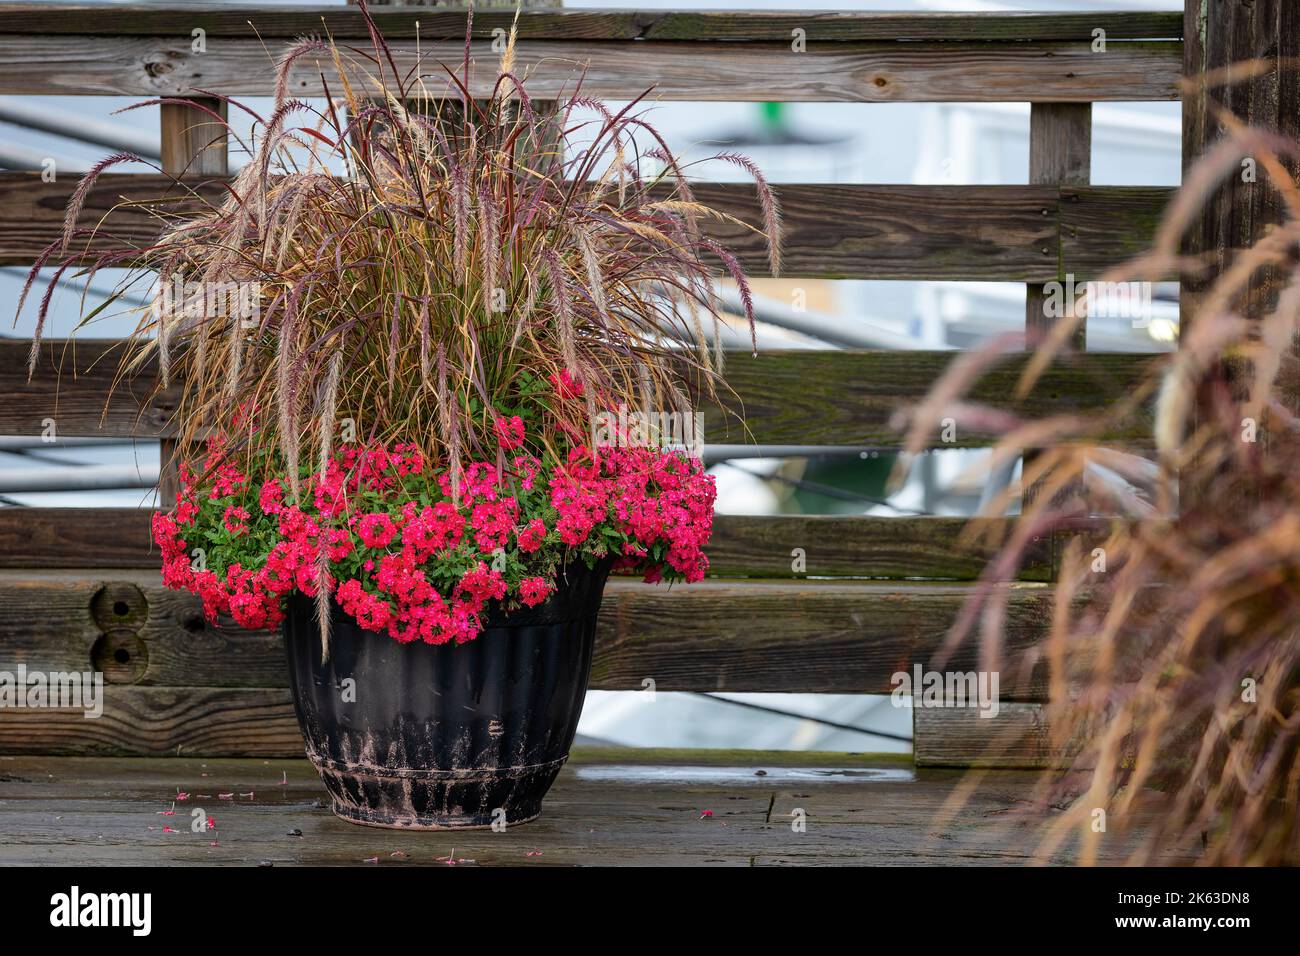 Flower pot sits against a wooden fence on a dock with red flower and brown grass plants. Stock Photo